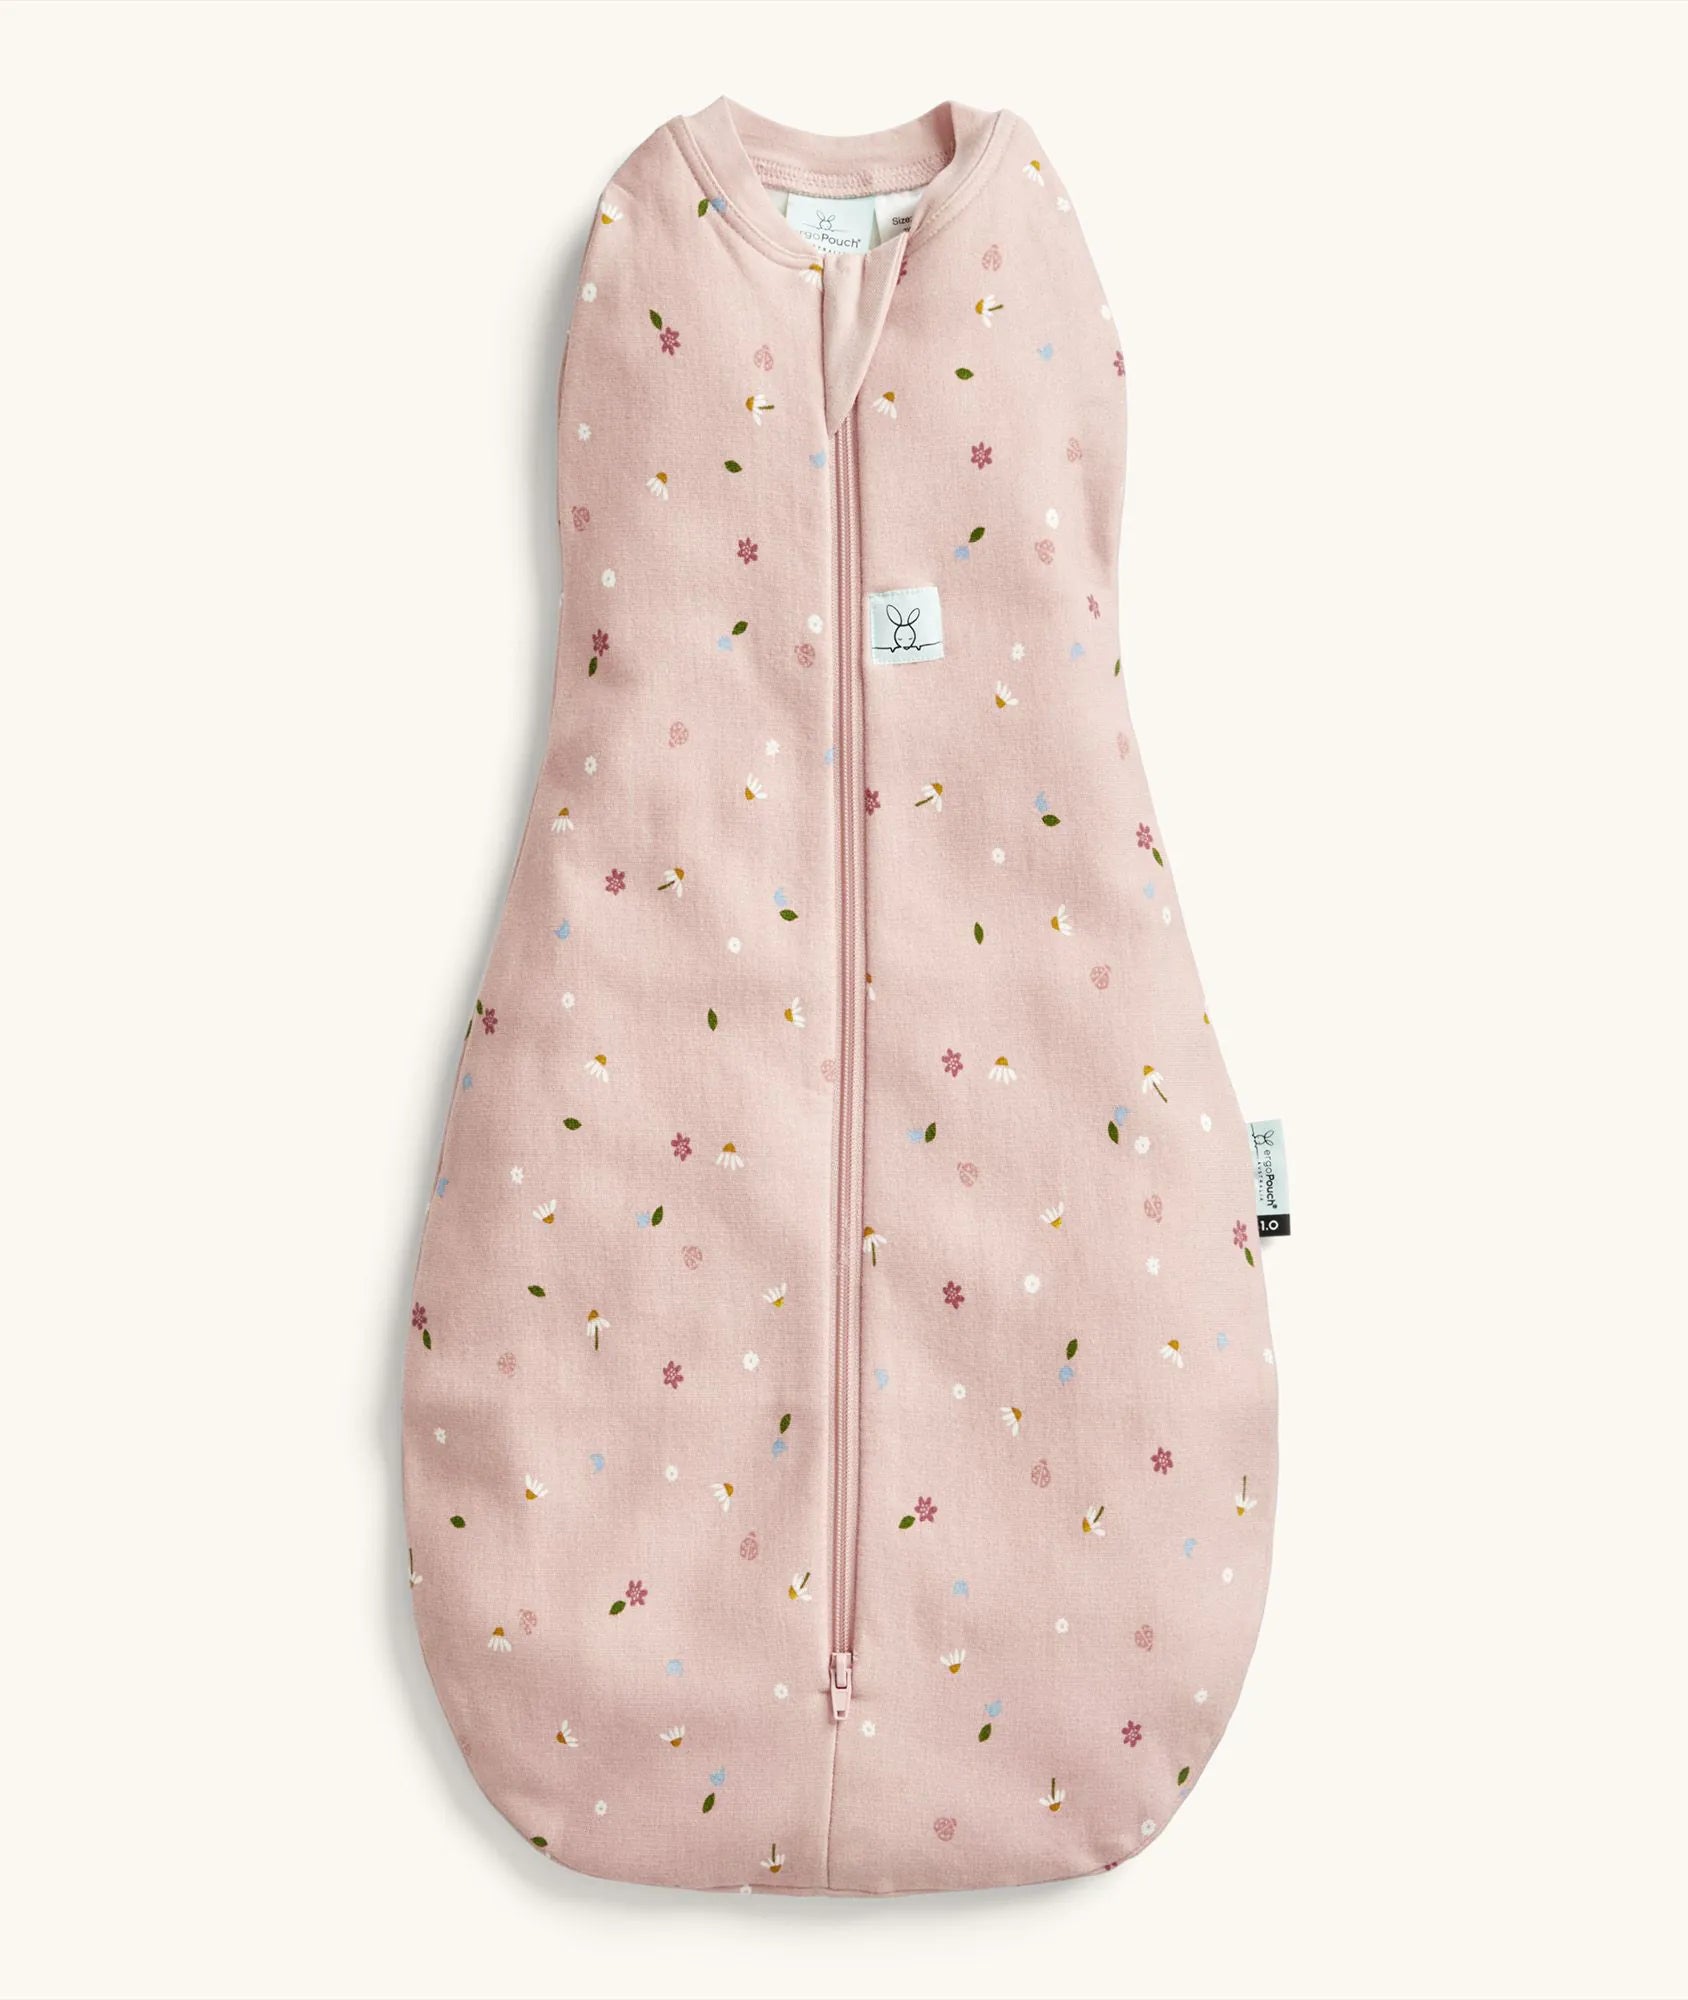 ErgoPouch Cocoon Swaddle Bag 1.0 TOG - Daisies